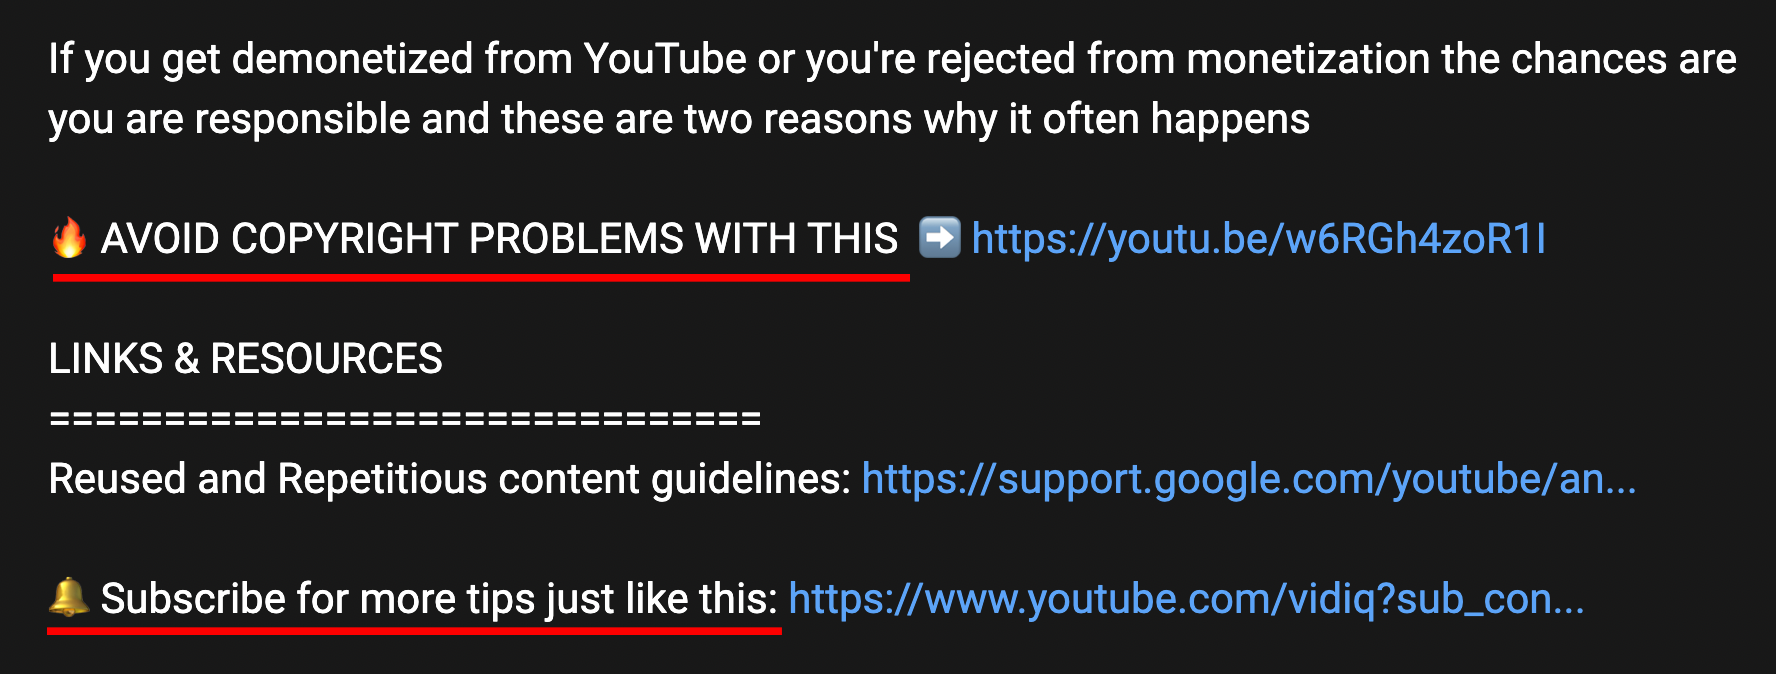 Two calls-to-action that appear before links: "Avoid copyright claims with this" and "subscribe for more tips just like this."